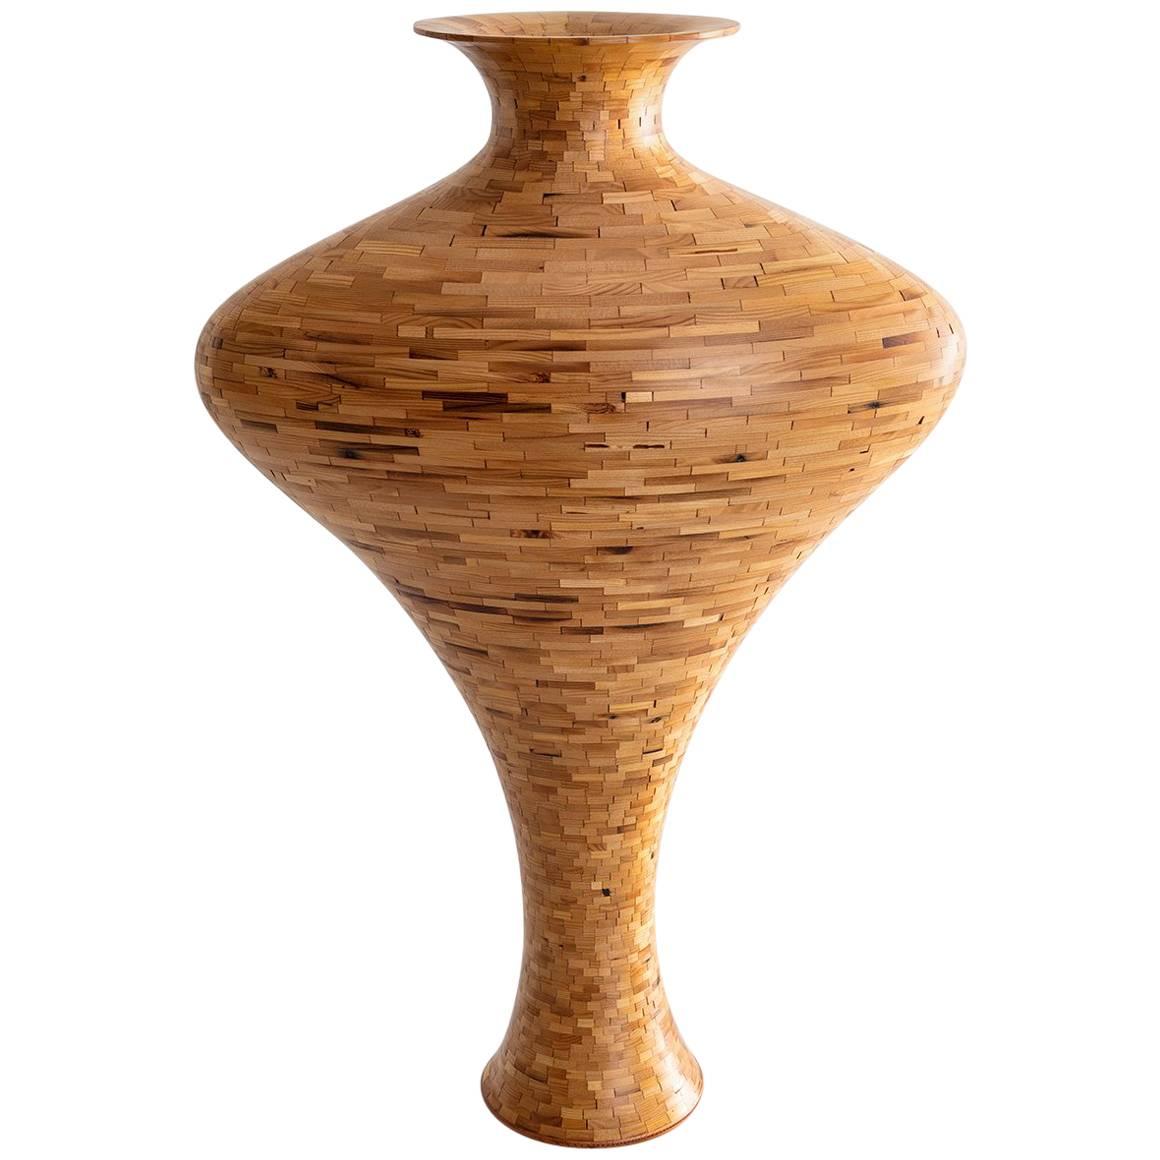 Contemporary American Large Wooden Vase, Douglas Fir, Handmade, Available Now